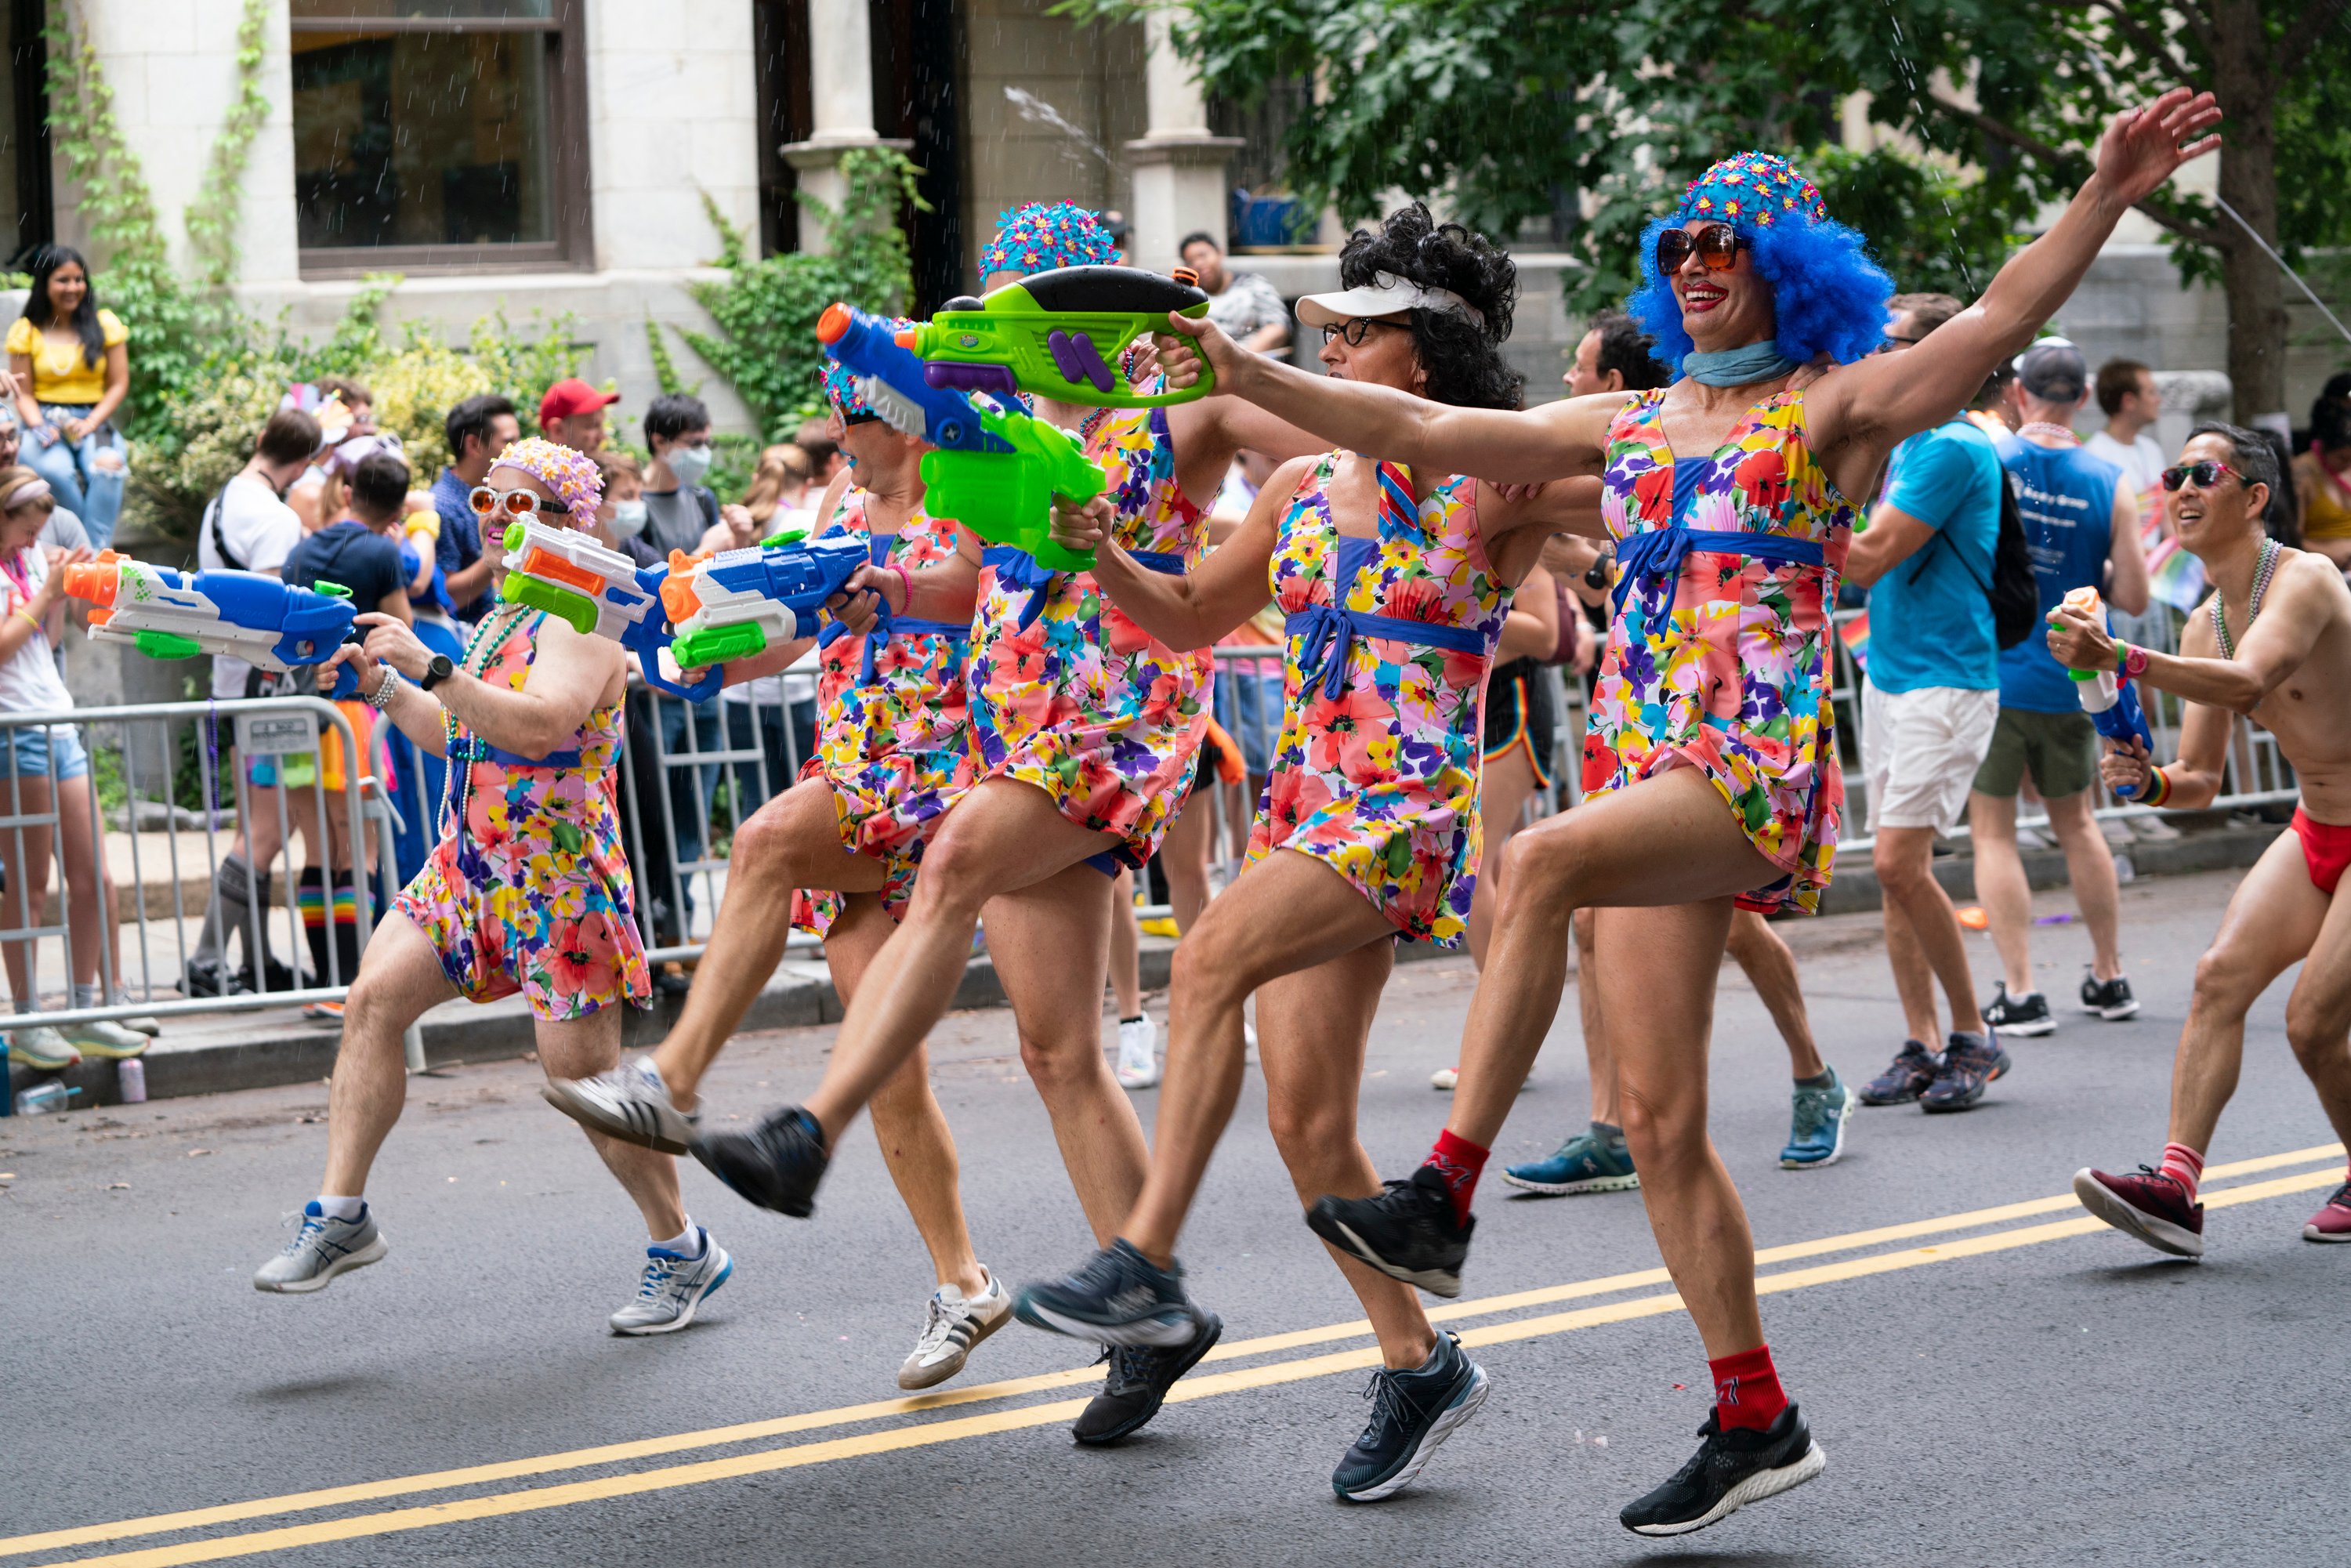 PHOTOS Thousands Gathered in DC for the Capital Pride Parade on